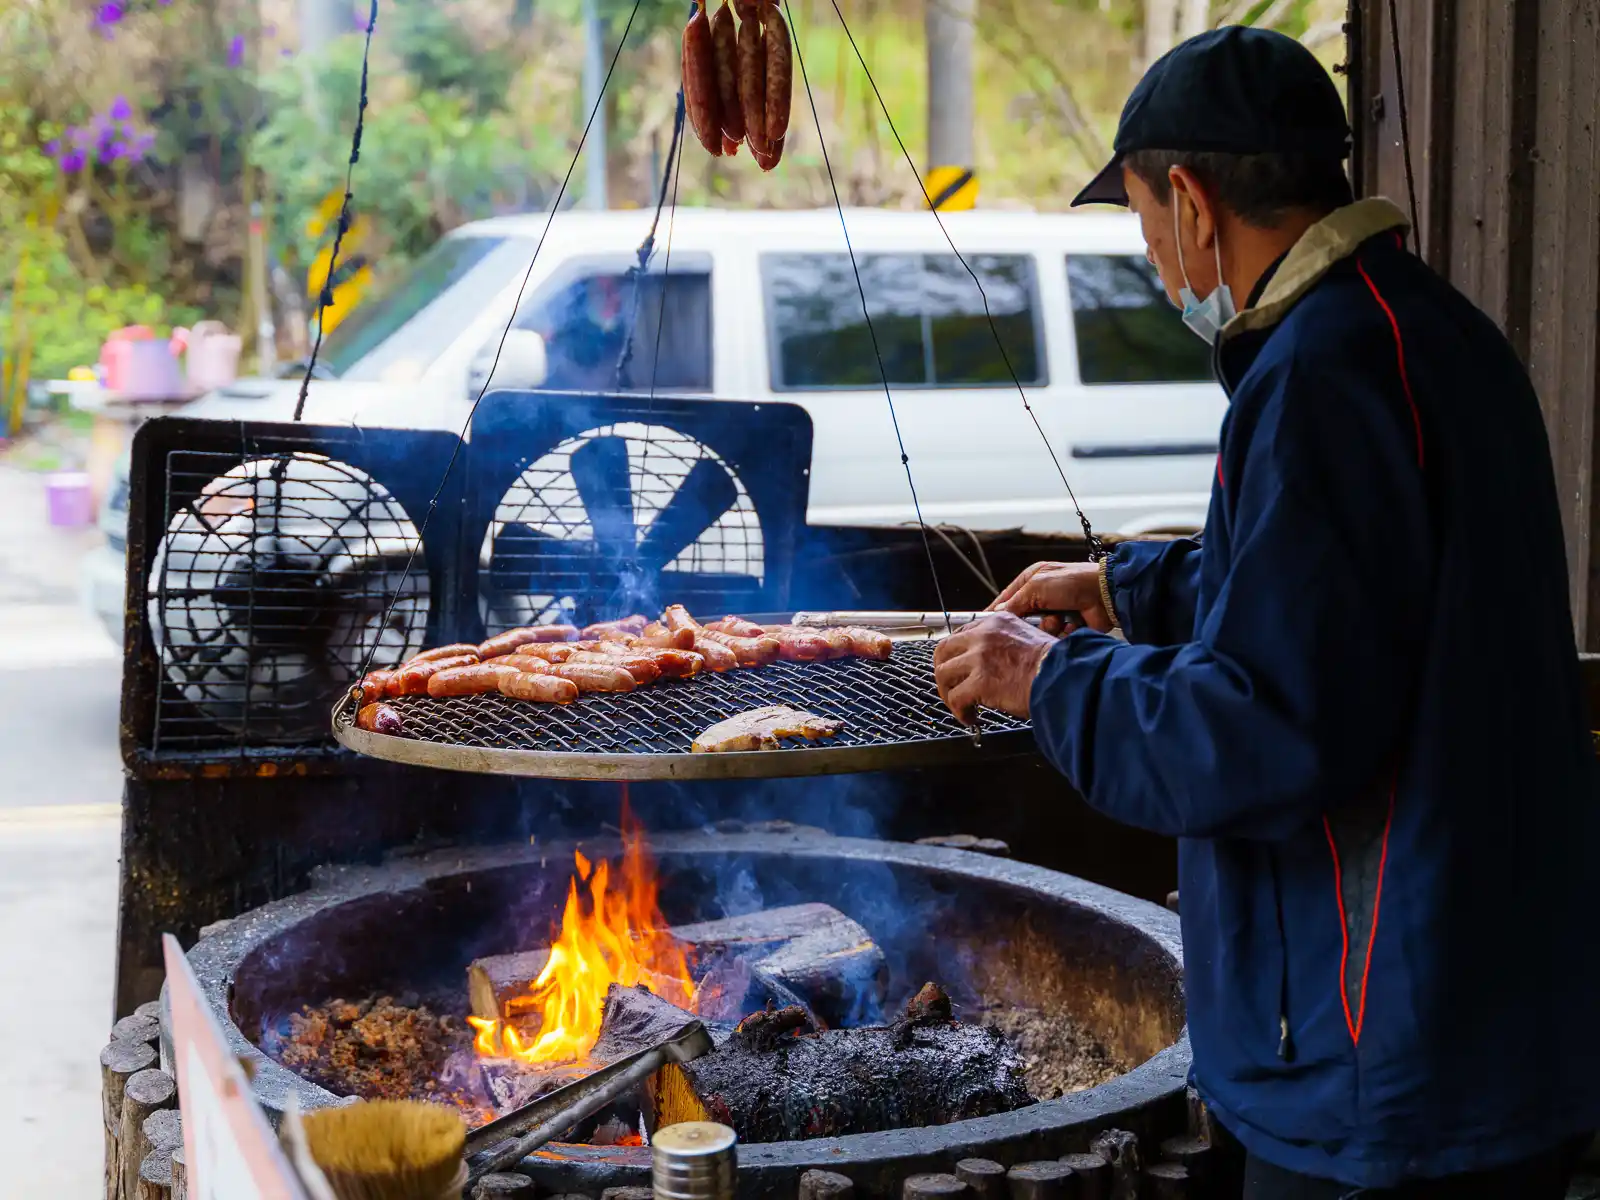 An indigenous vendor sells sausages nearby.